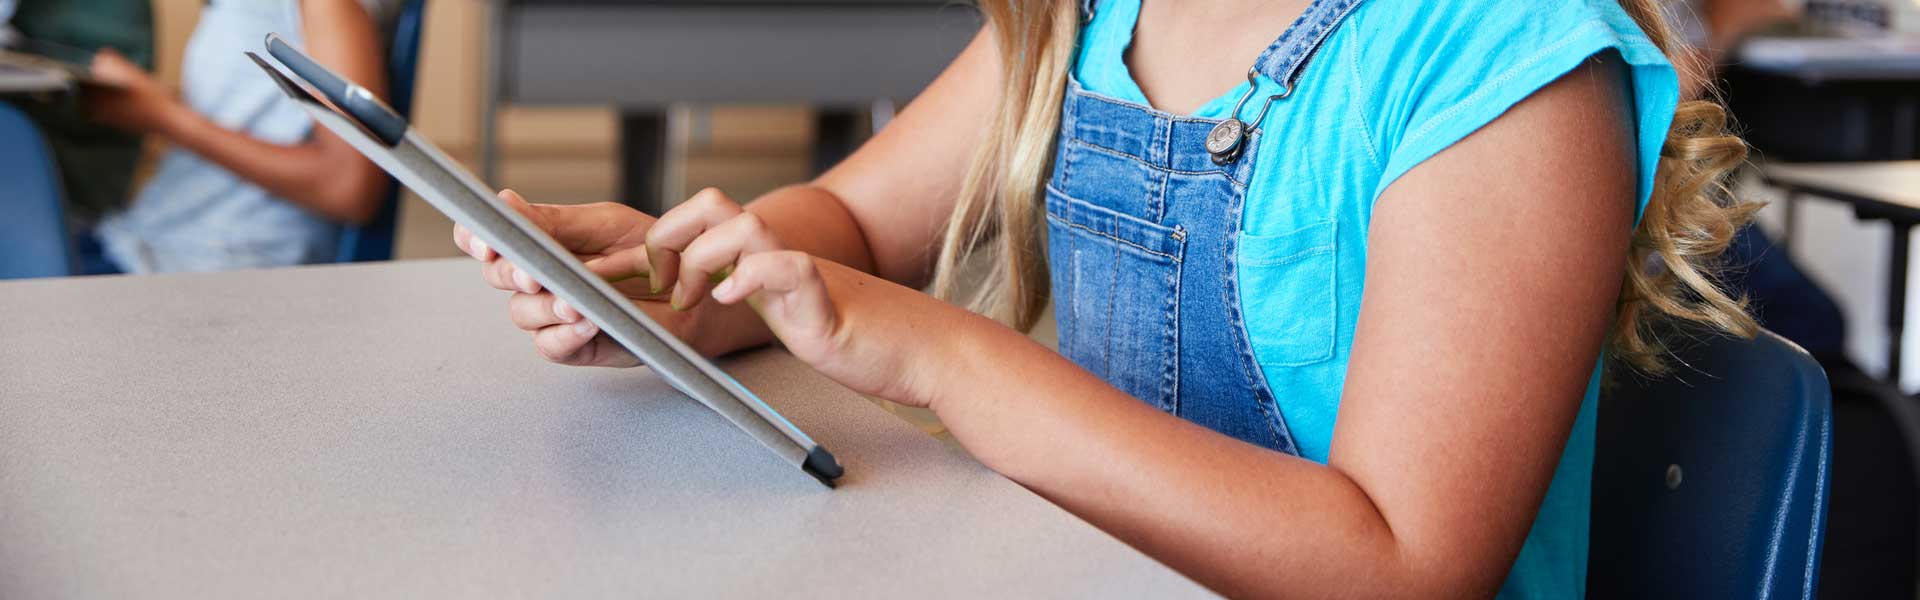 Recommended school iPad cases and covers